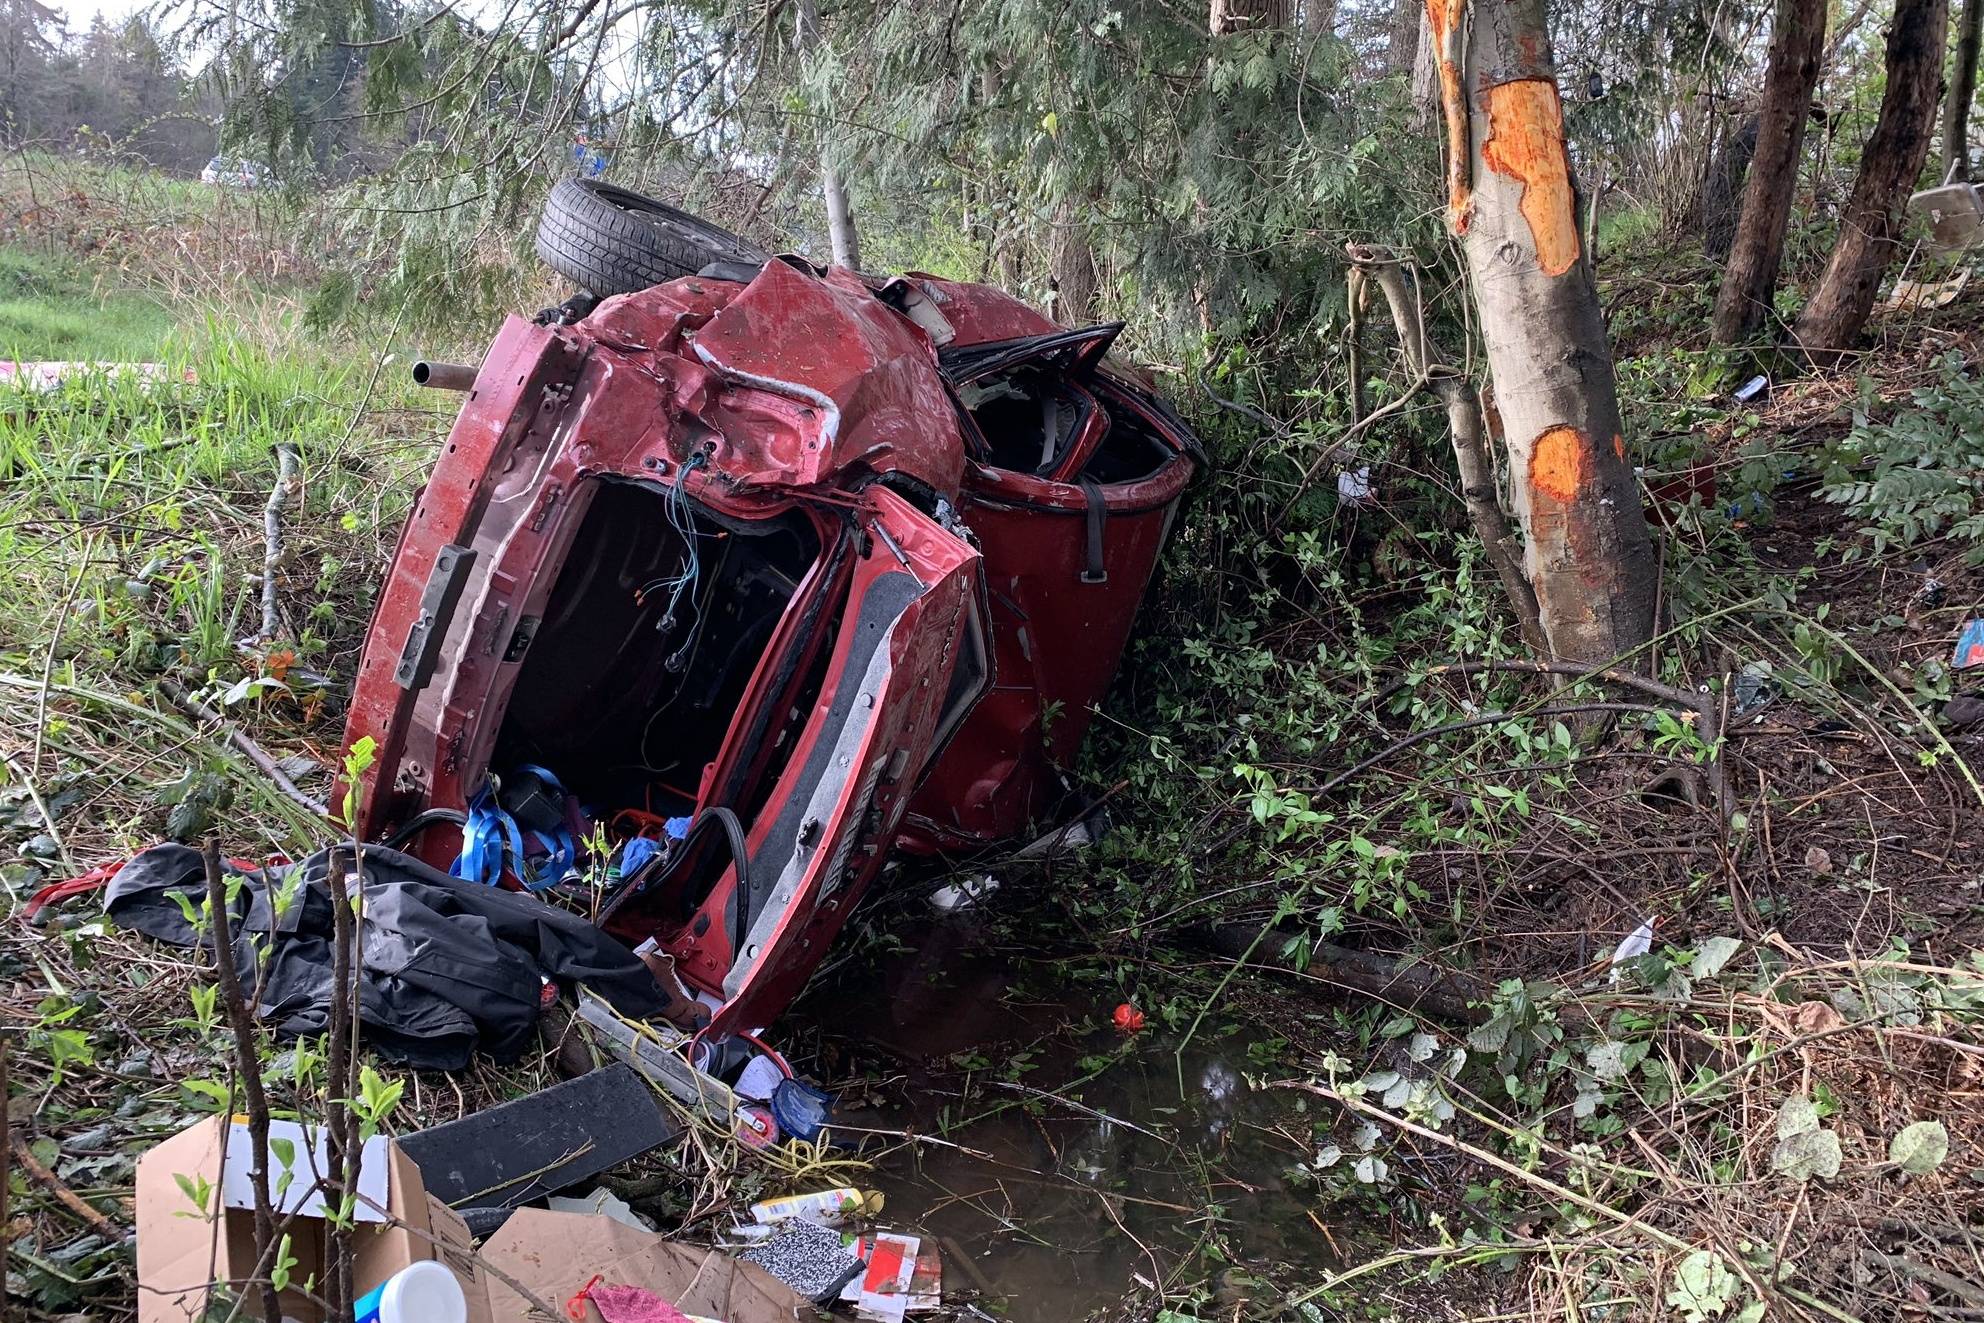 A 3-year-old boy suffered serious injuries as a passenger in this car that crashed early Monday along Interstate 5 in Kent. COURTESY PHOTO, State Patrol